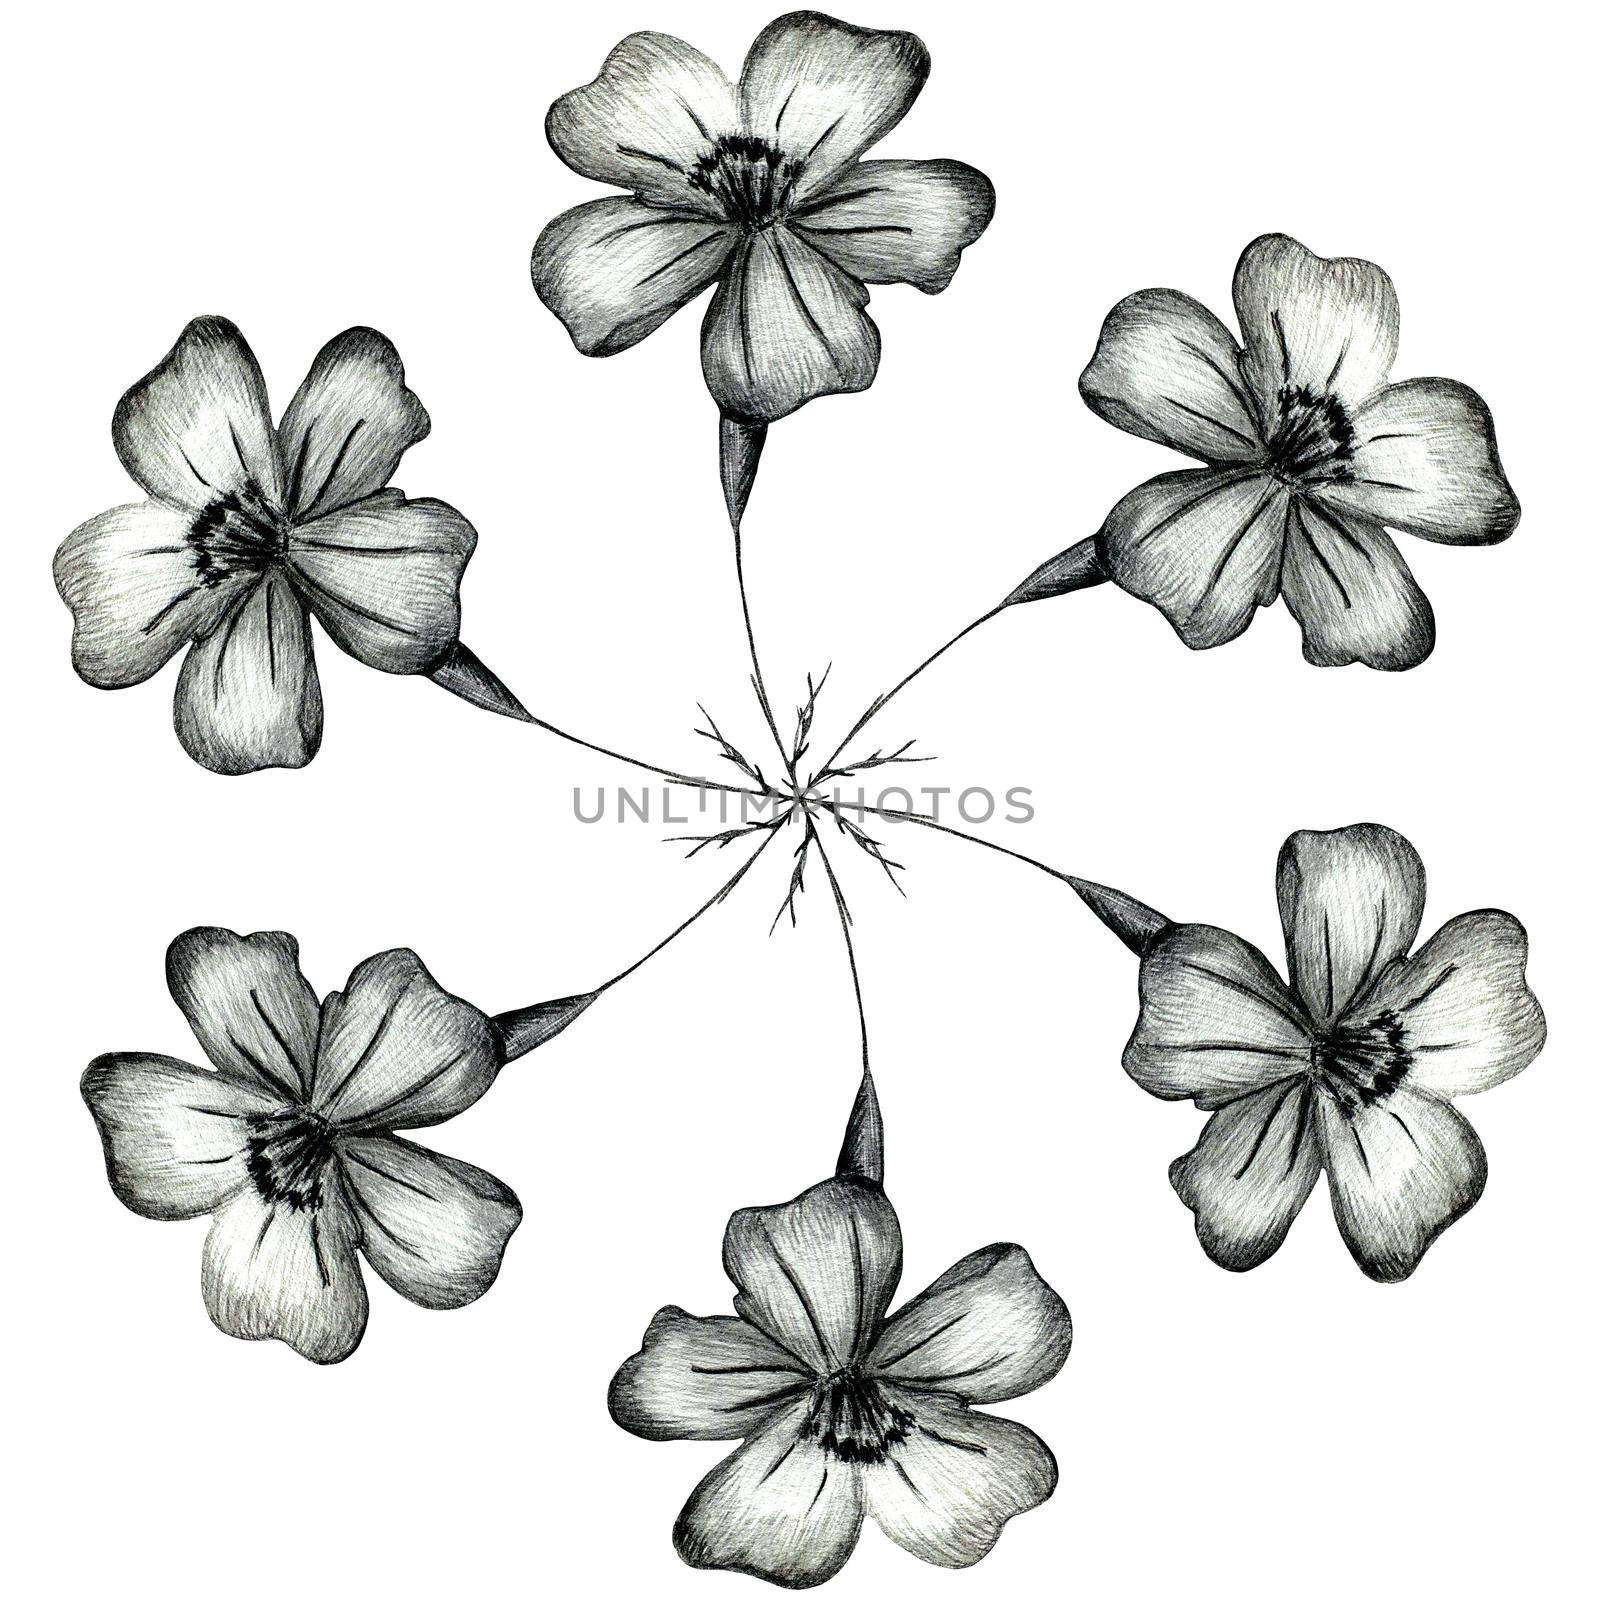 Black and White Hand Drawn Marigold Flower Round Composition Isolated on White Background. Marigold Flower Composition Drawn by Black Pencil.